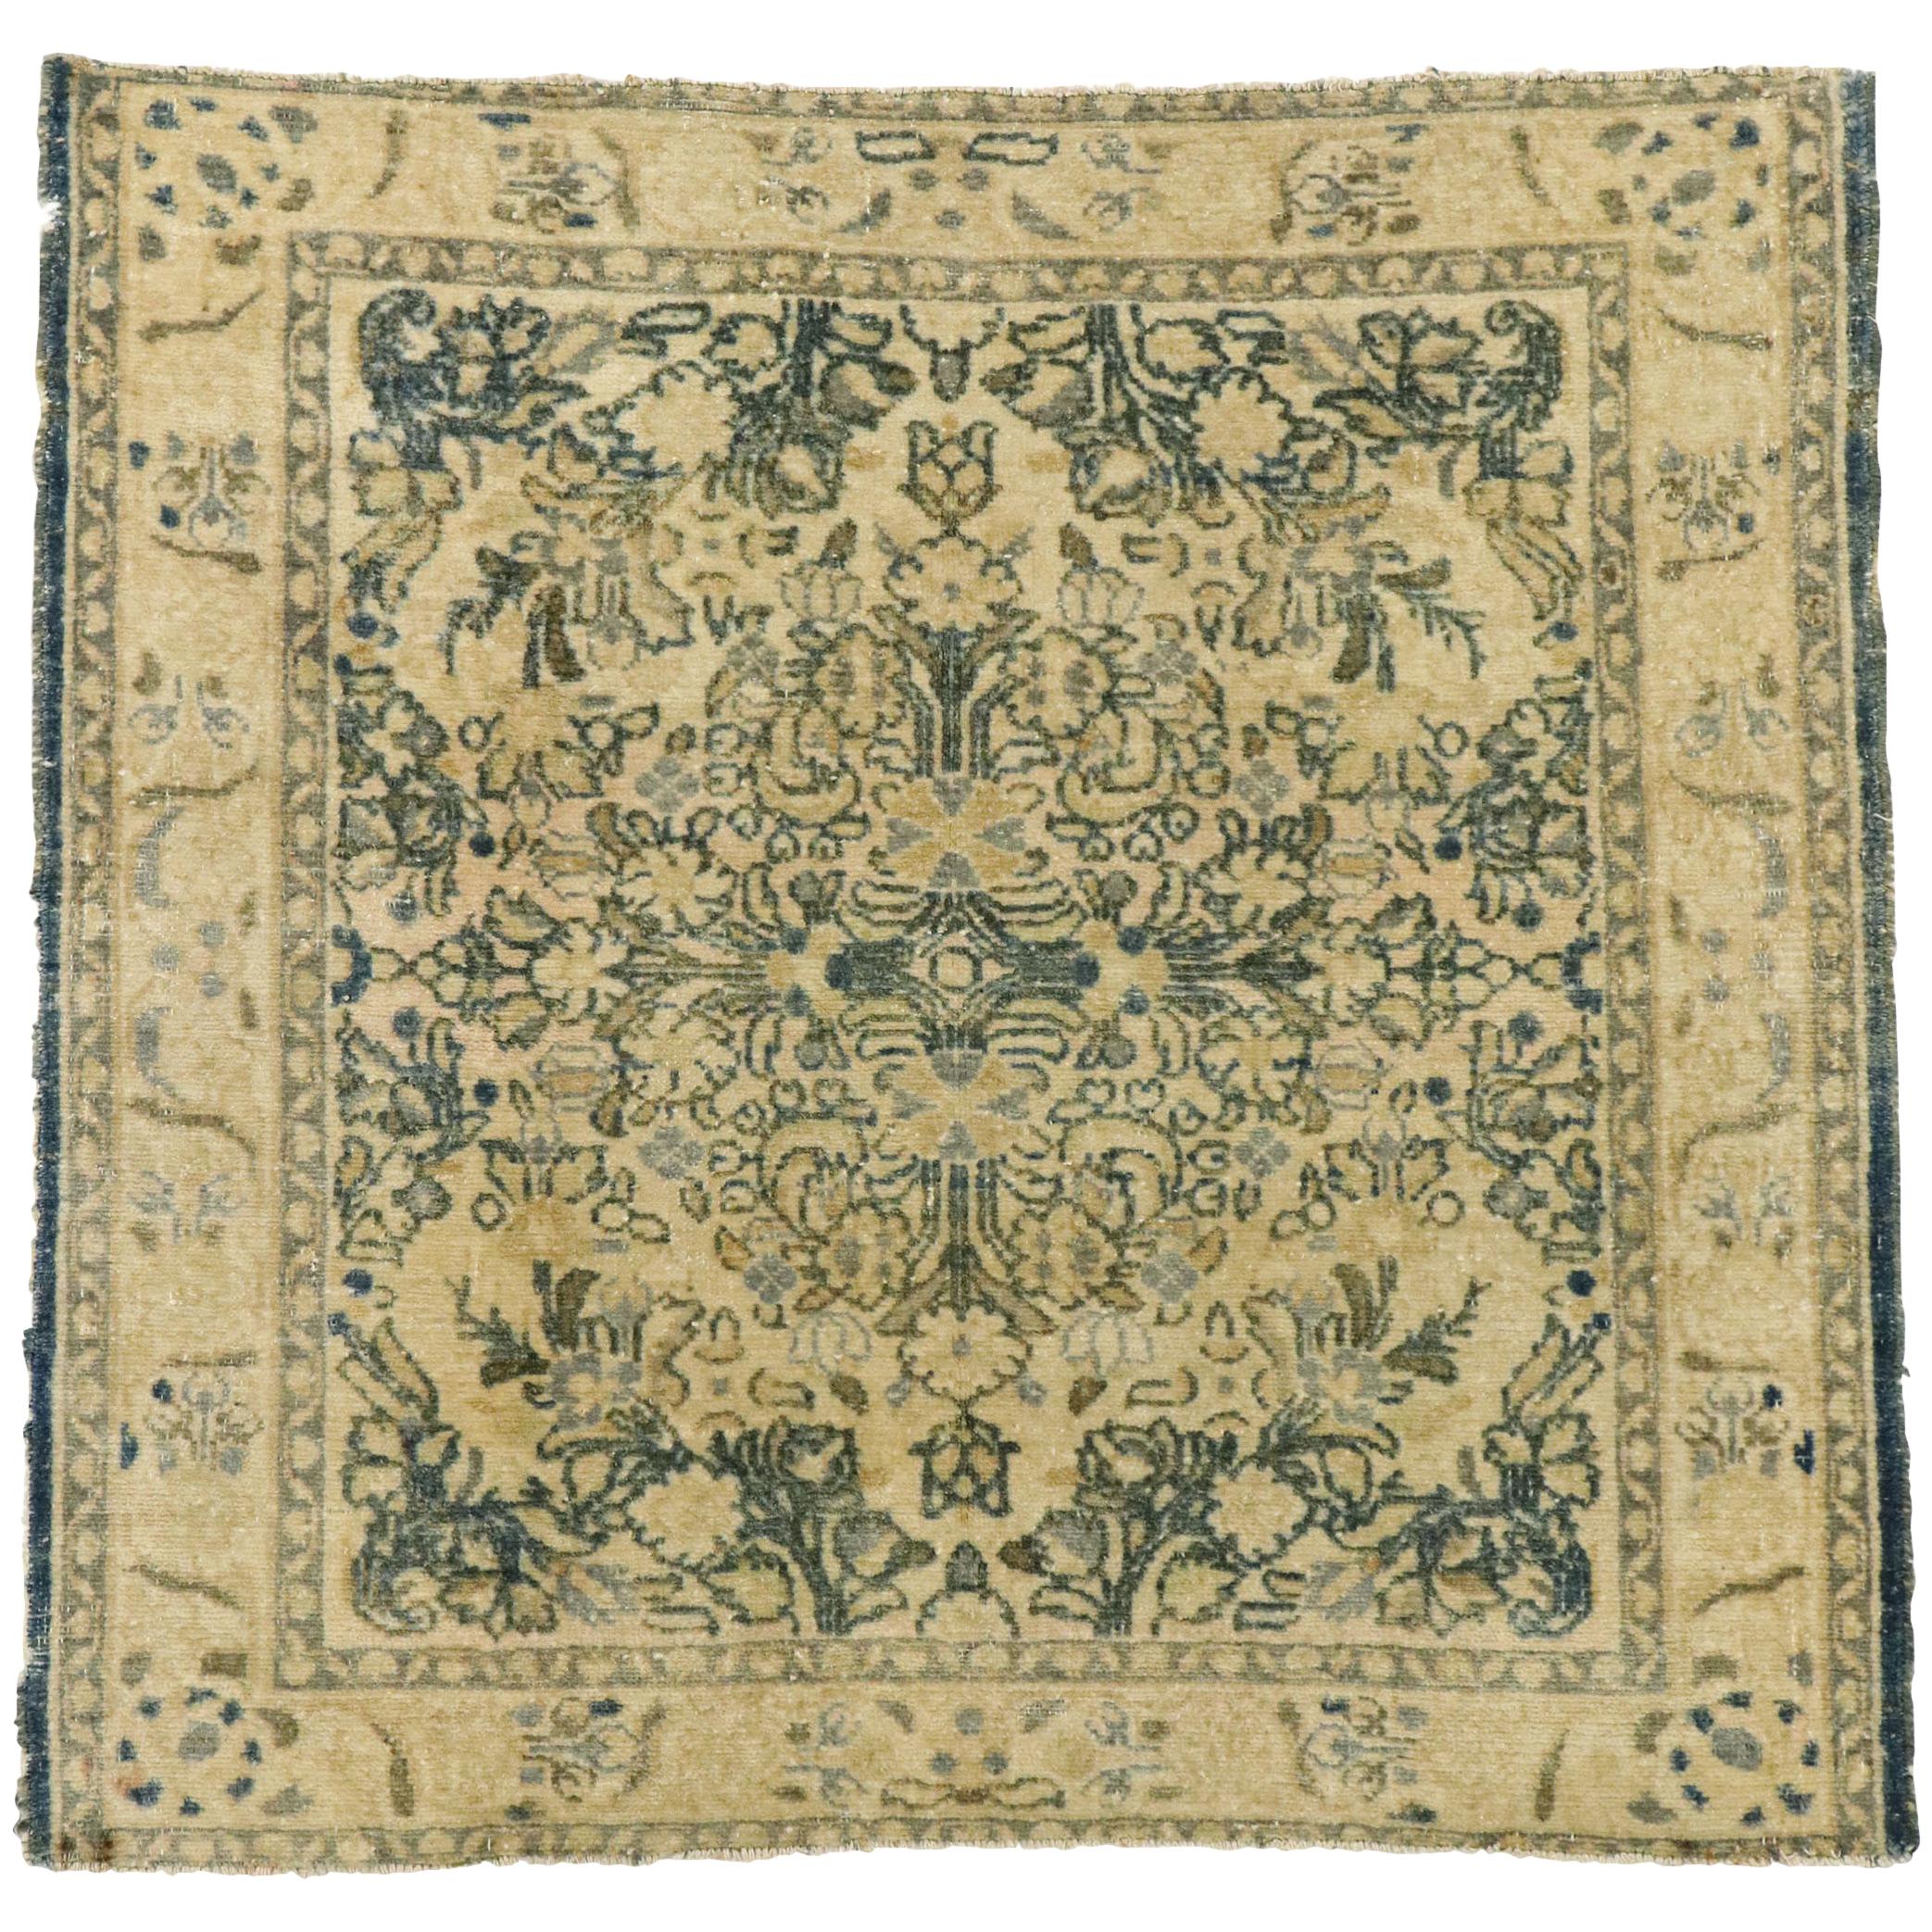 Distressed Vintage Turkish Oushak Rug with Rustic Cotswold English Manor Style